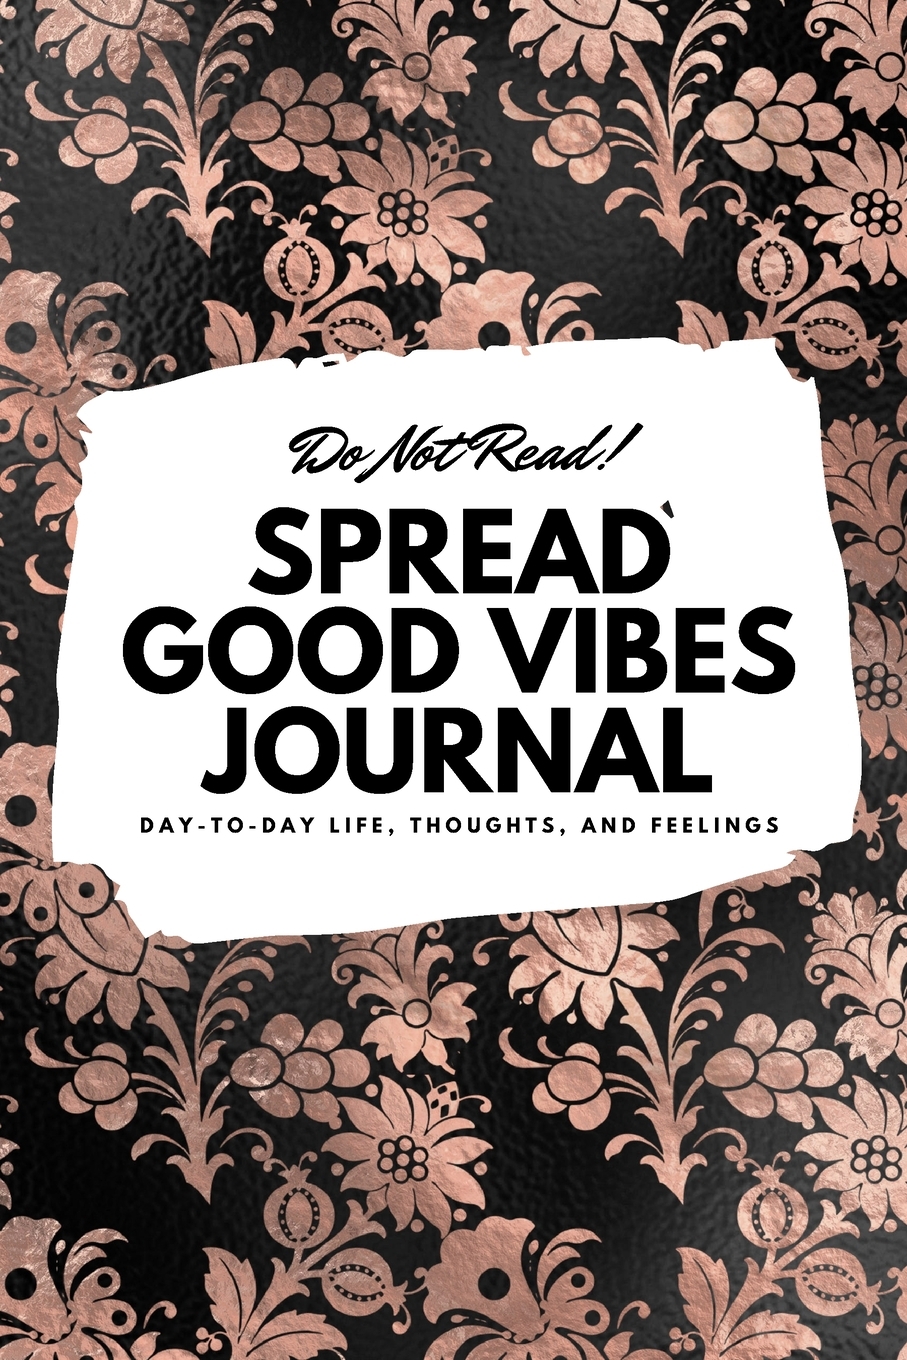 6x9 Blank Journal: Do Not Read! Spread Good Vibes Journal - Small Blank Journal - 6x9 Blank Journal (Softcover Journal / Notebook / Sketchbook / Diary) (Series #47) (Paperback) - image 1 of 1